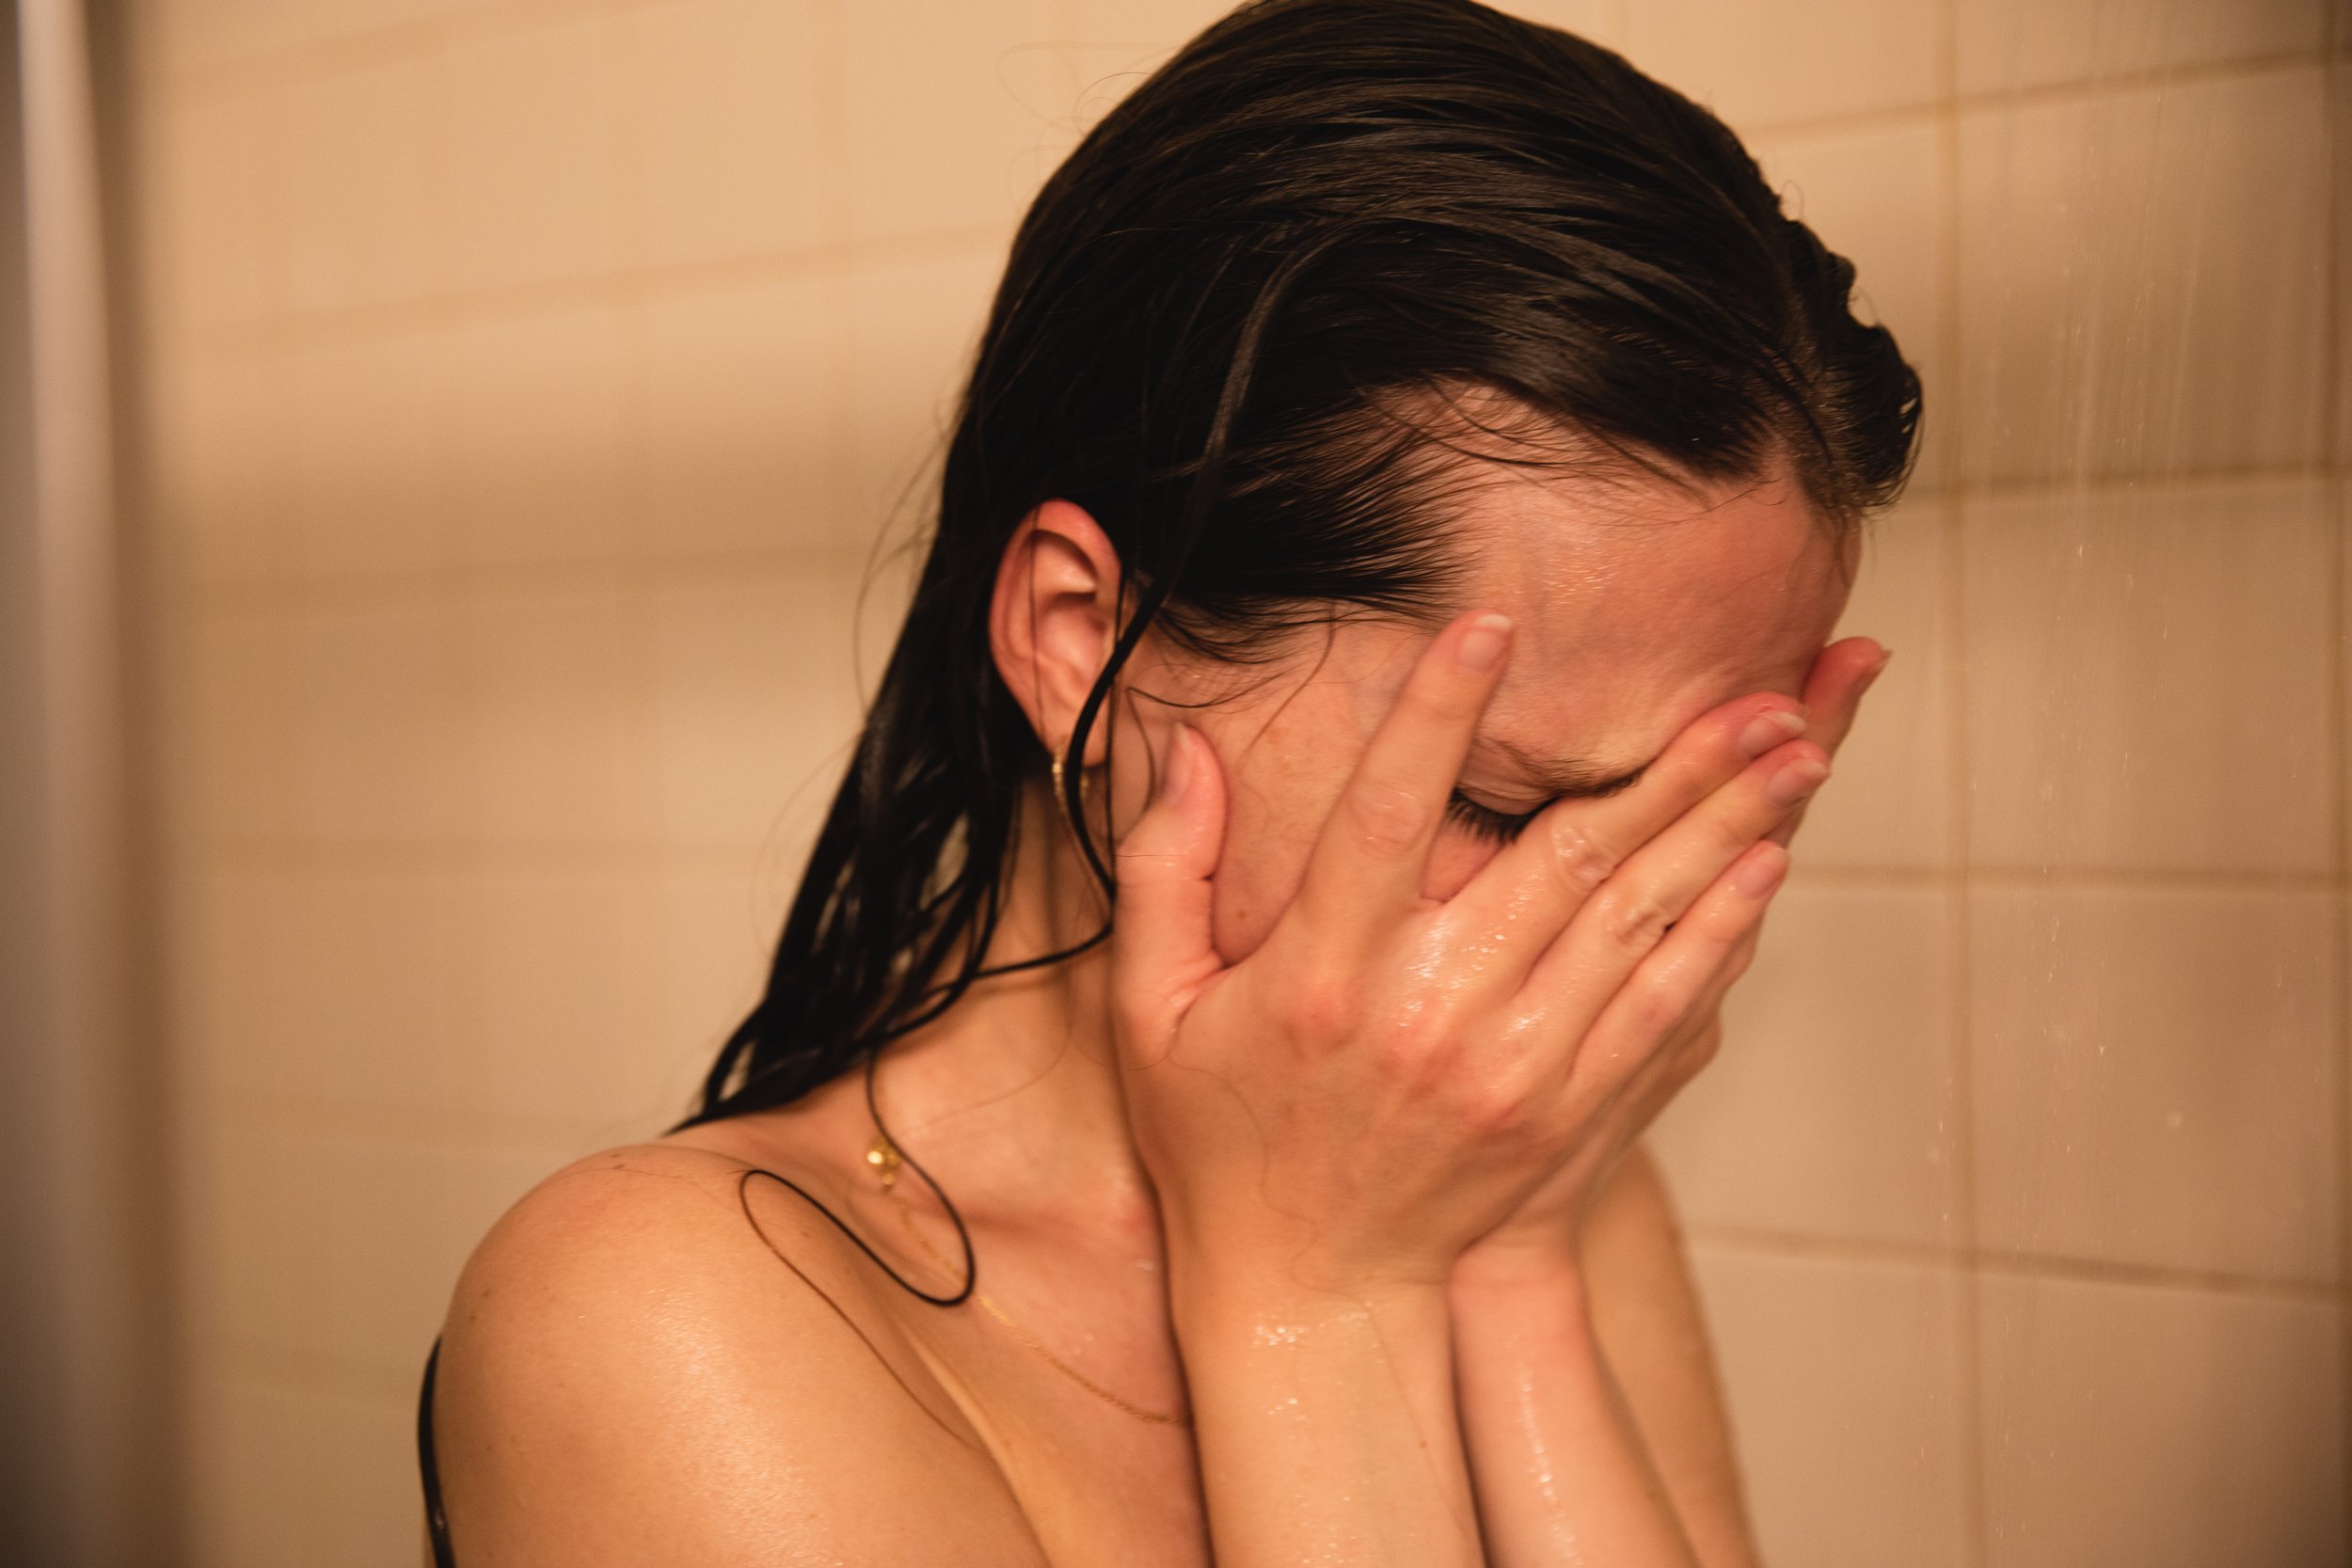  Single mom Kathy has a small  breakdown in the shower.Kathy works 40 hours a week with the US Patent office from her home in Washington DC, while being a full time care-giver to her small son. Typically each night after she puts him to bed, she can 